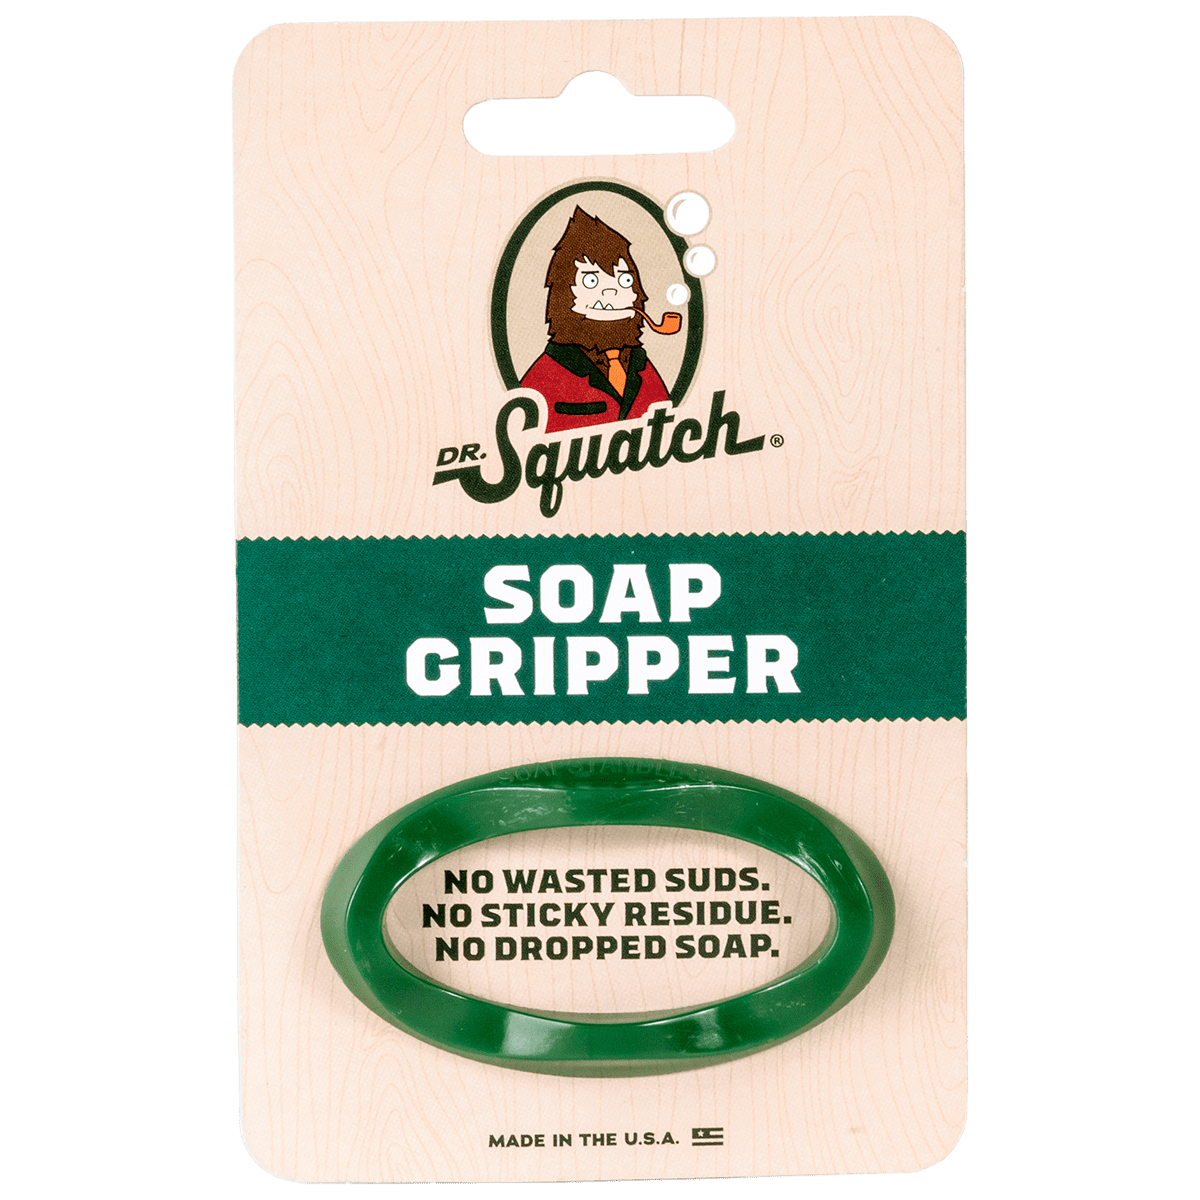 https://cdn.shopify.com/s/files/1/0083/1727/2179/products/Dr-Squatch-Soap-Gripper-Stogz-Find-Your-High-512_1200x.png?v=1677198917